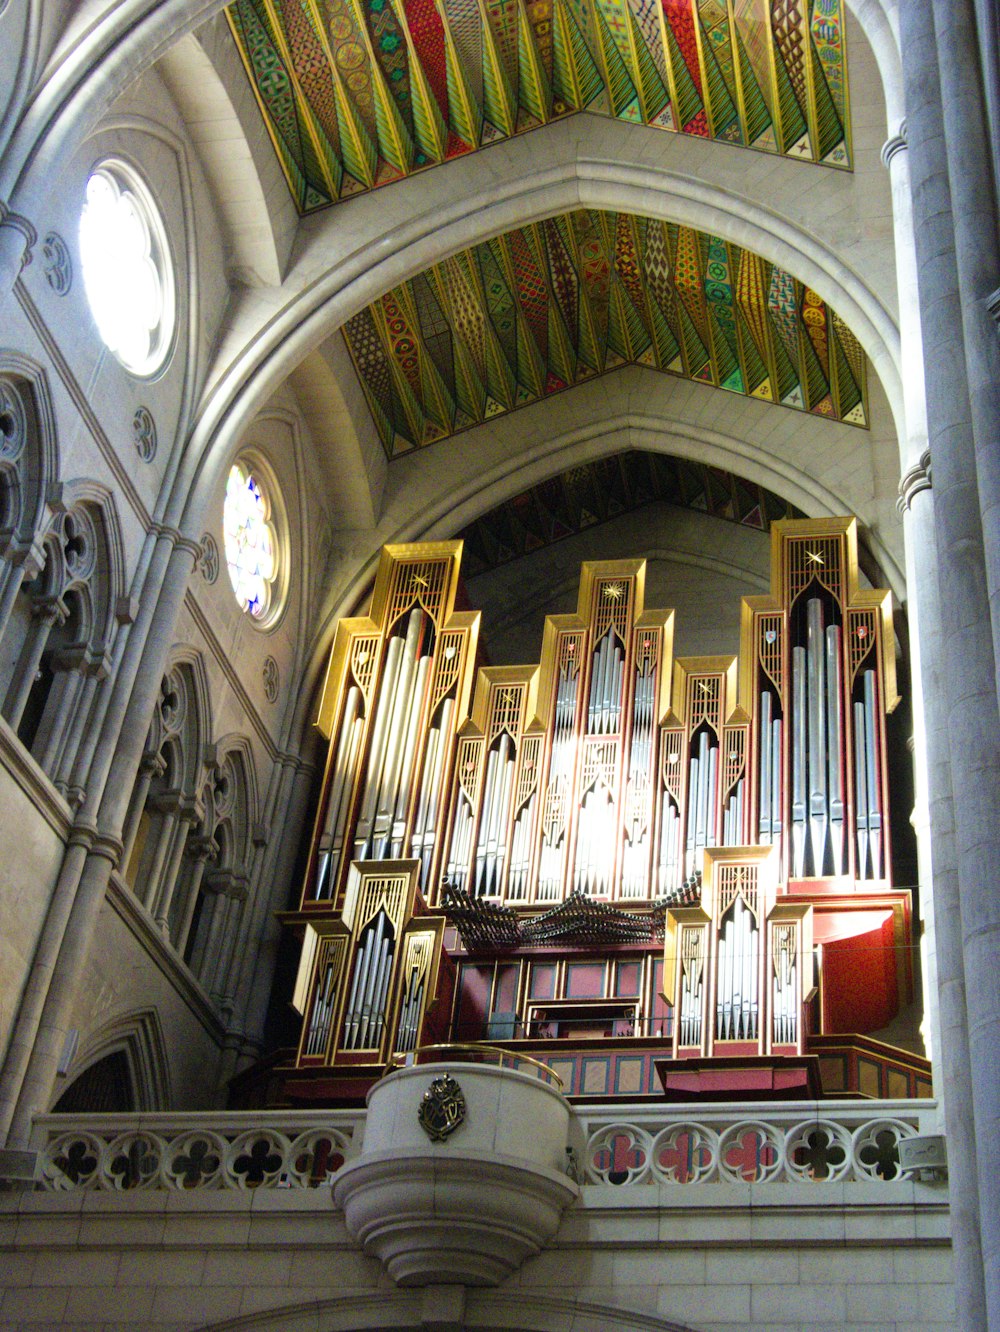 a large pipe organ in a church with stained glass windows